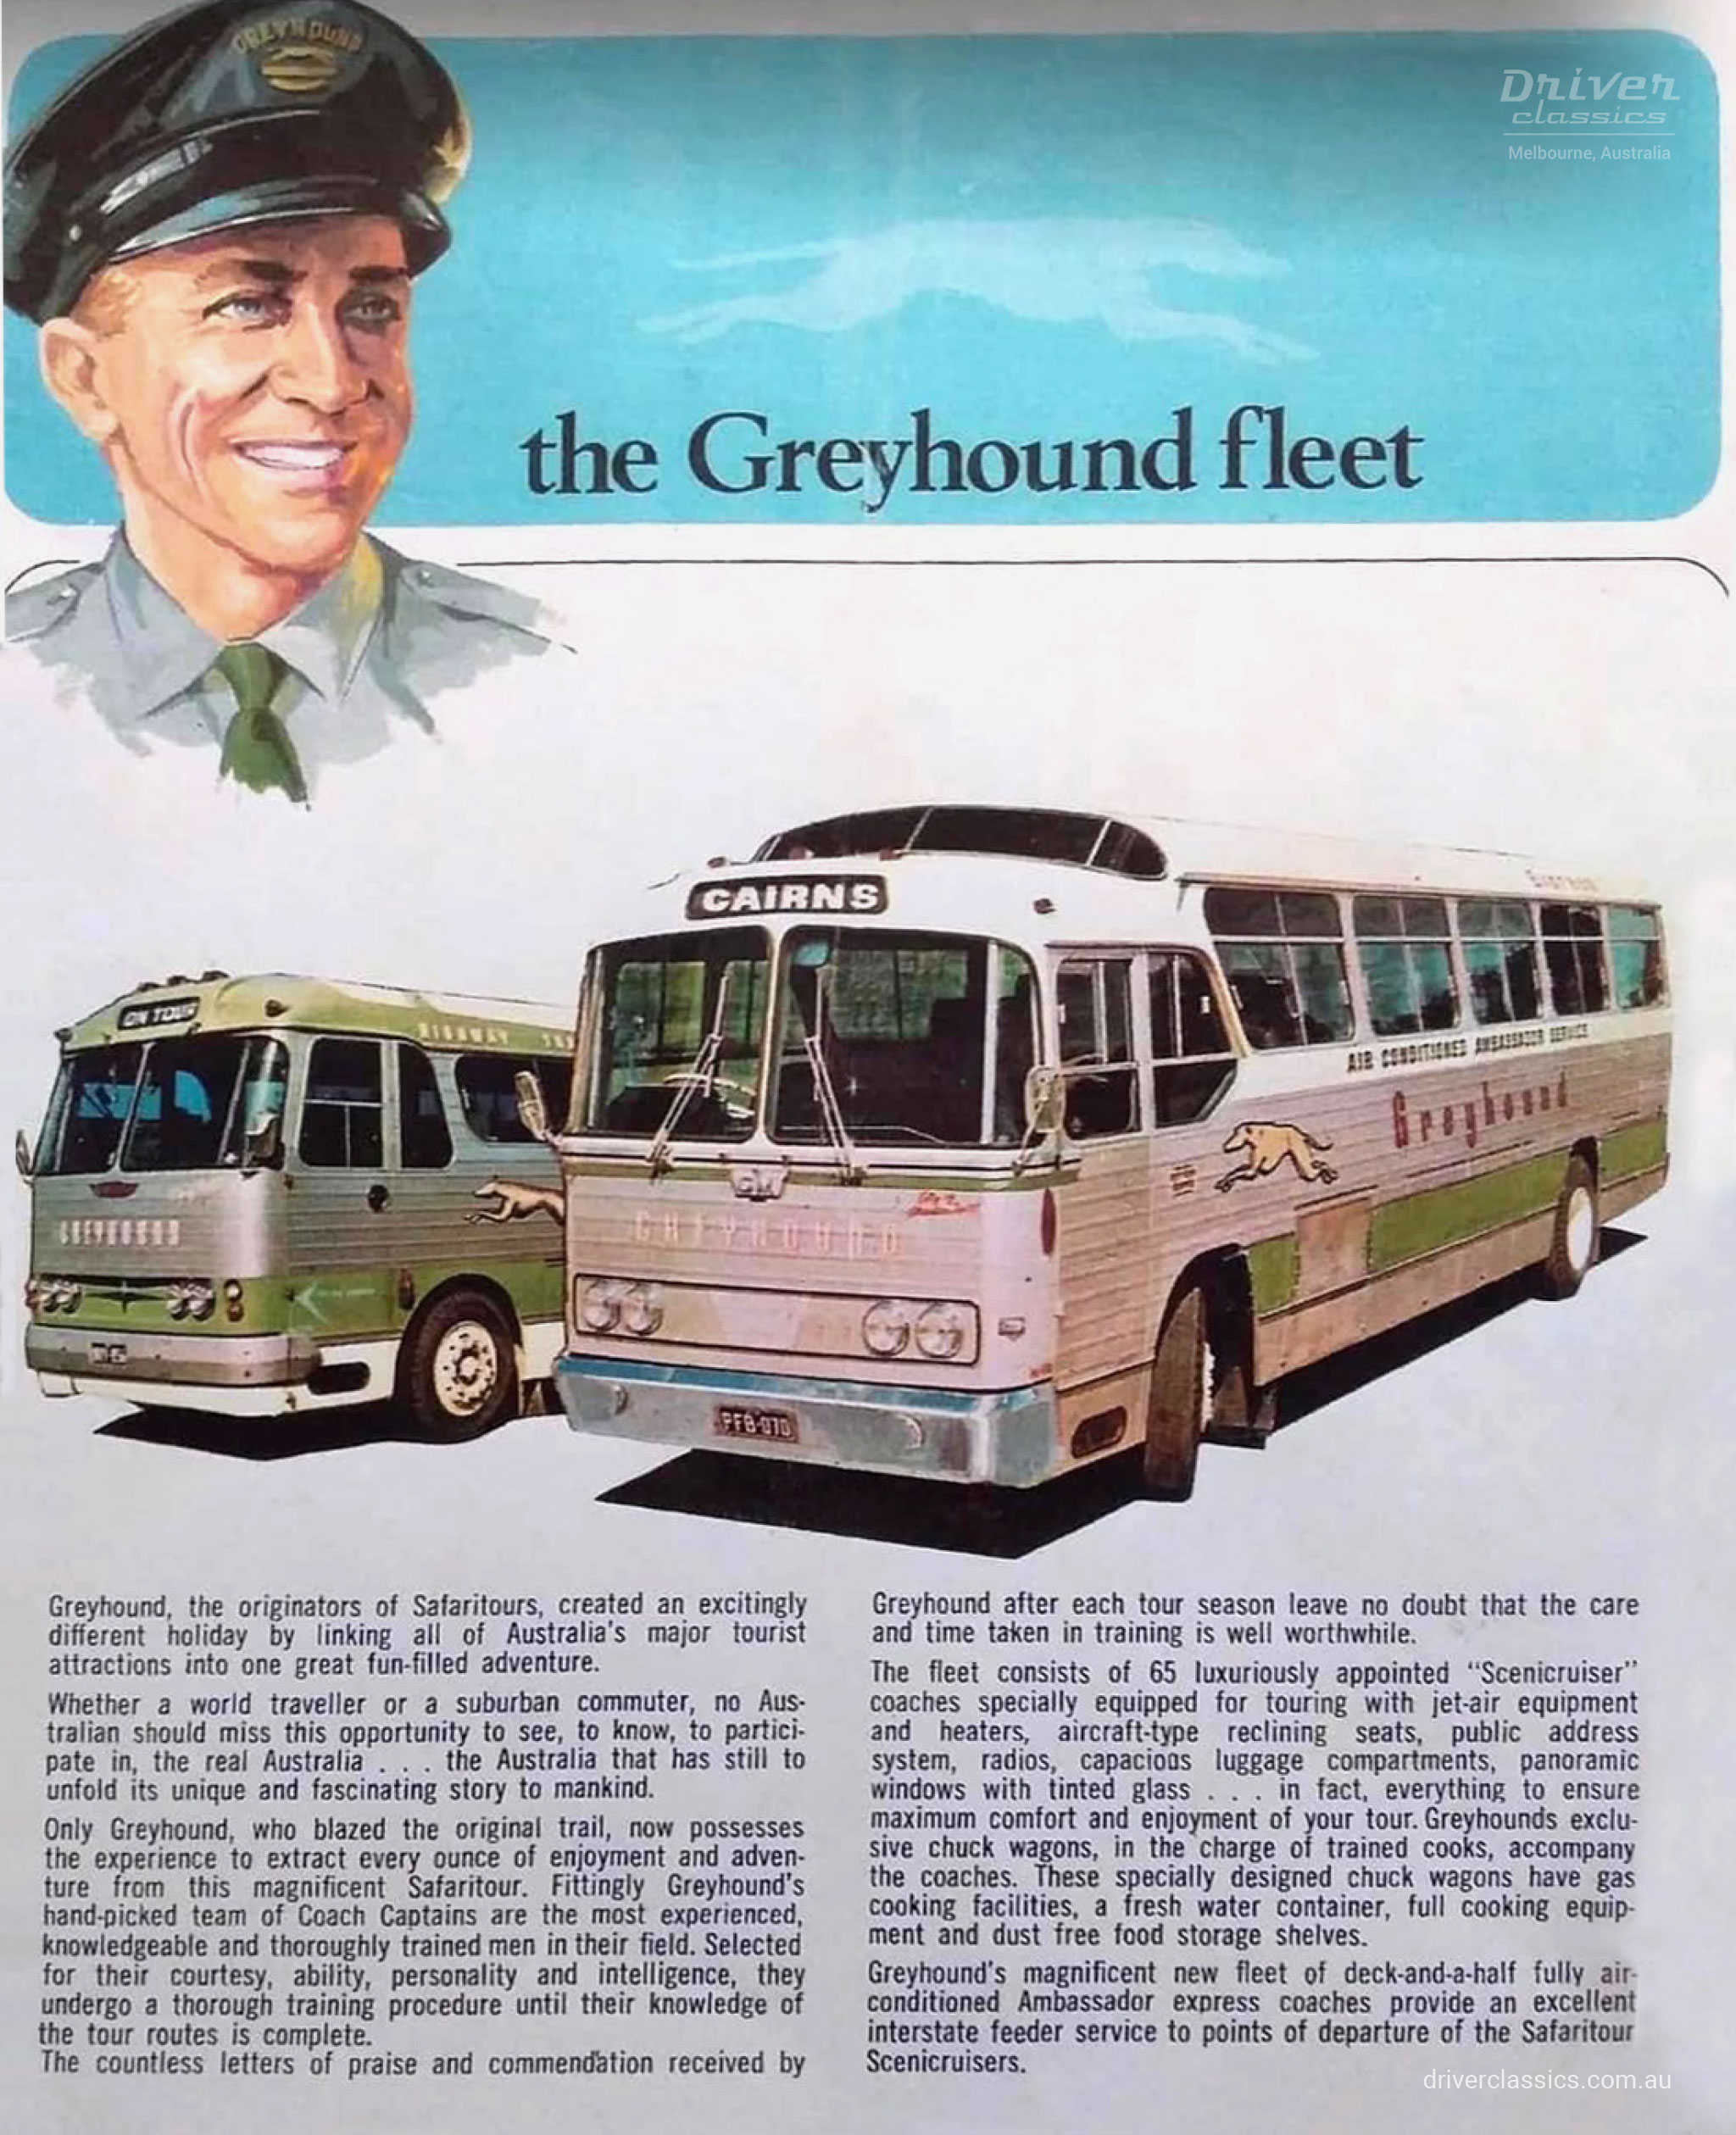 Greyhound Australia advertisement with a 1960s Highway Traveller bus and a 1960s GM Denning Mono bus.